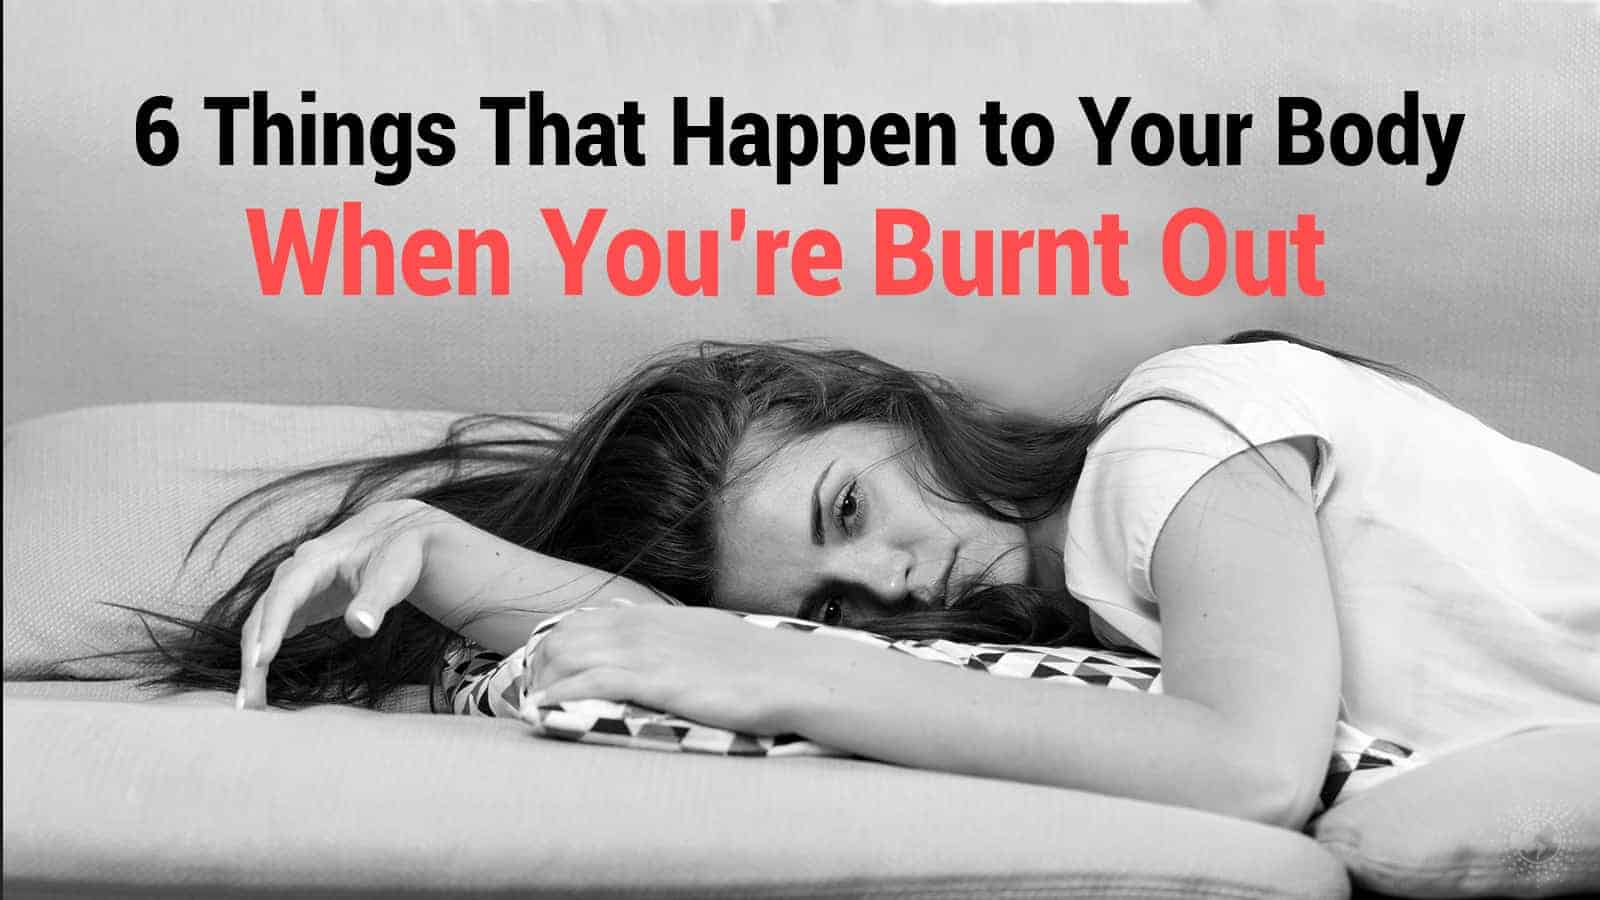 6 Things That Happen to Your Body When You’re Burnt Out